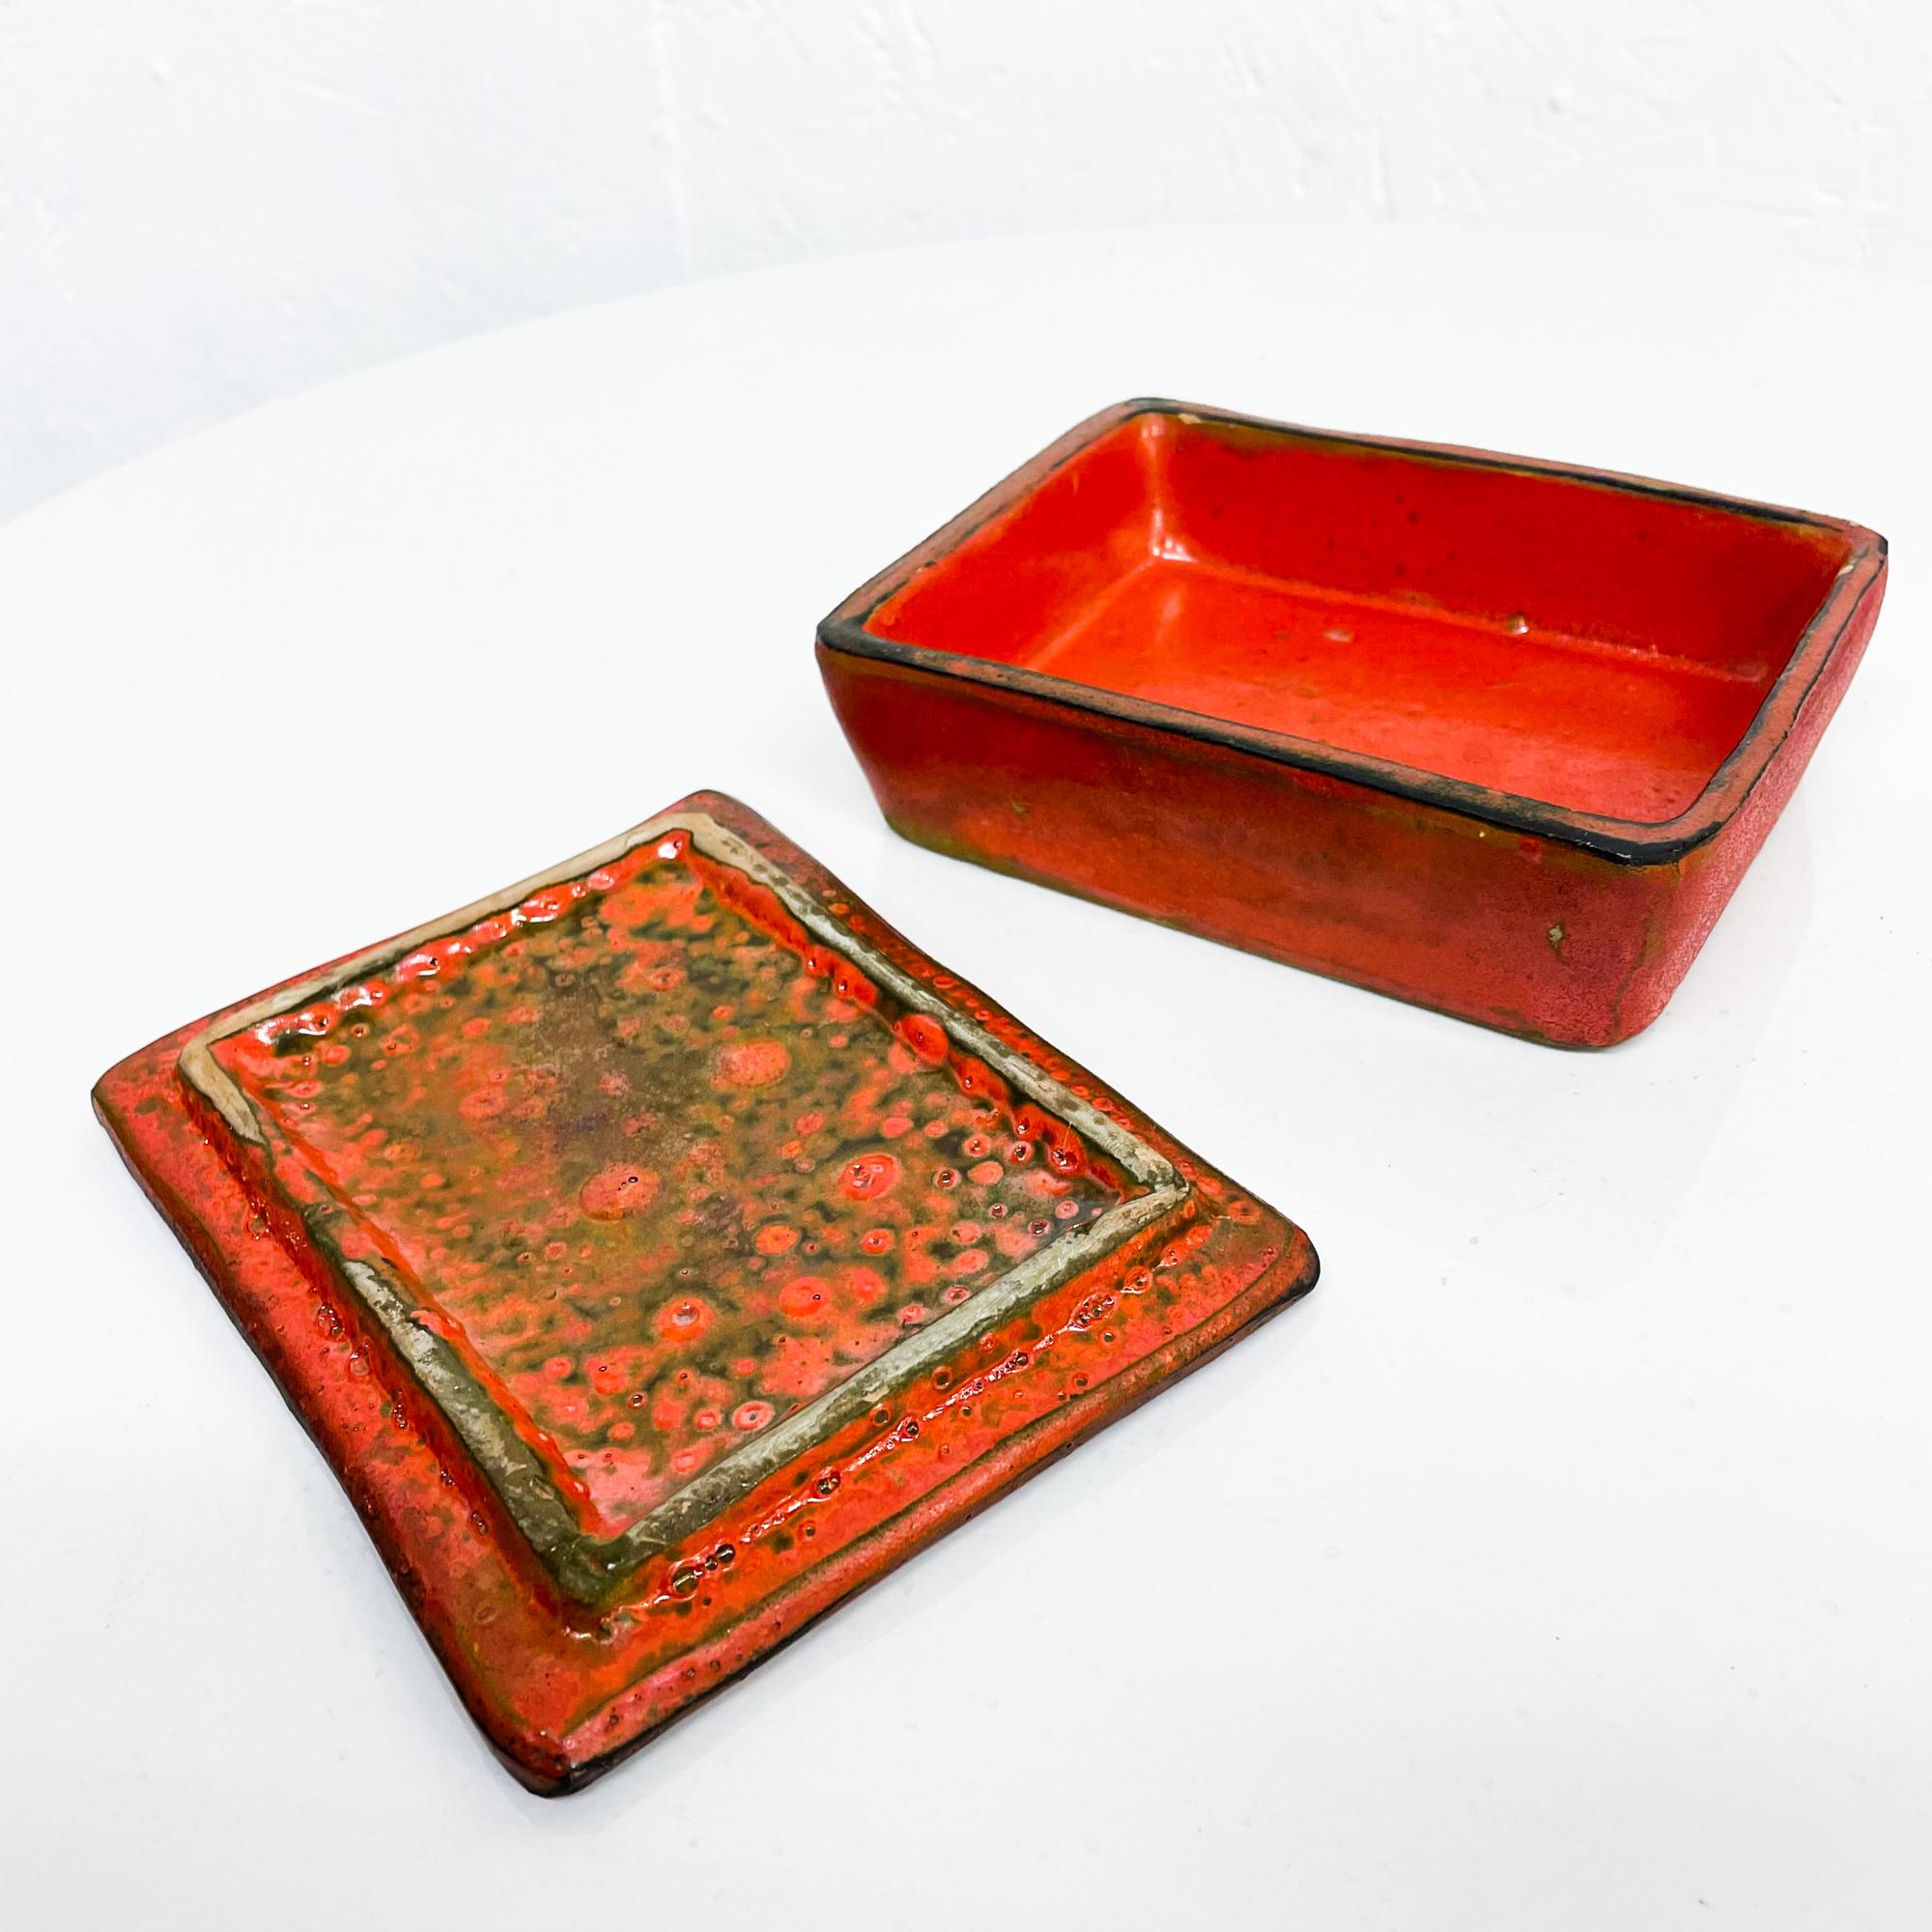 1960s Bitossi Red Pottery Lidded Box Relief Design Italy For Sale 1